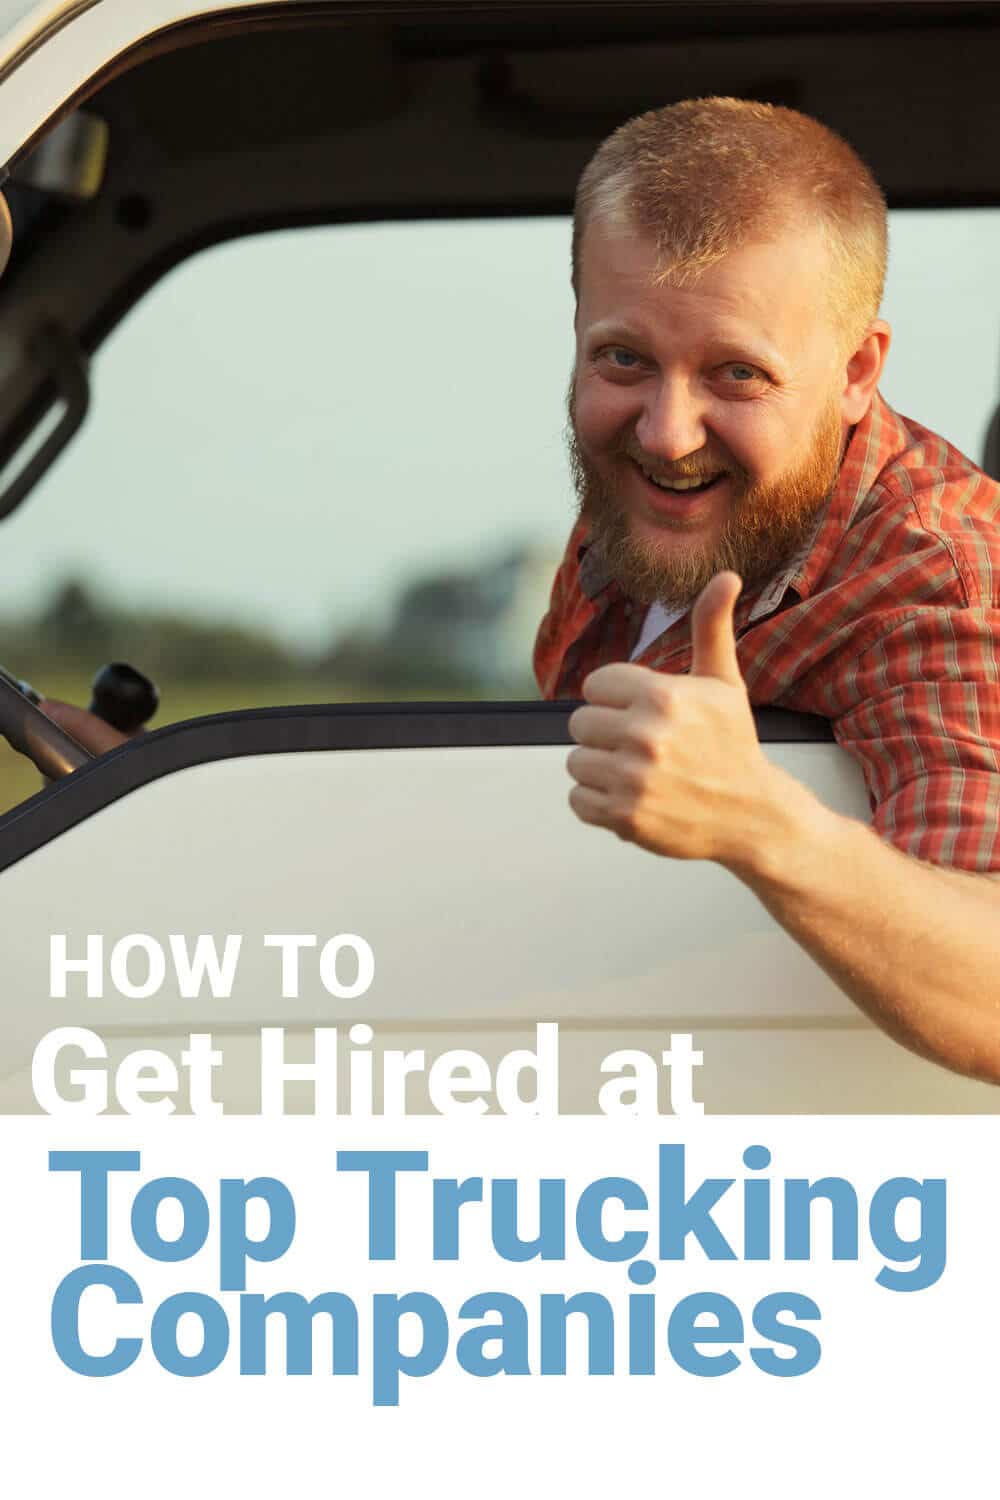 How to get hired at top trucking companies